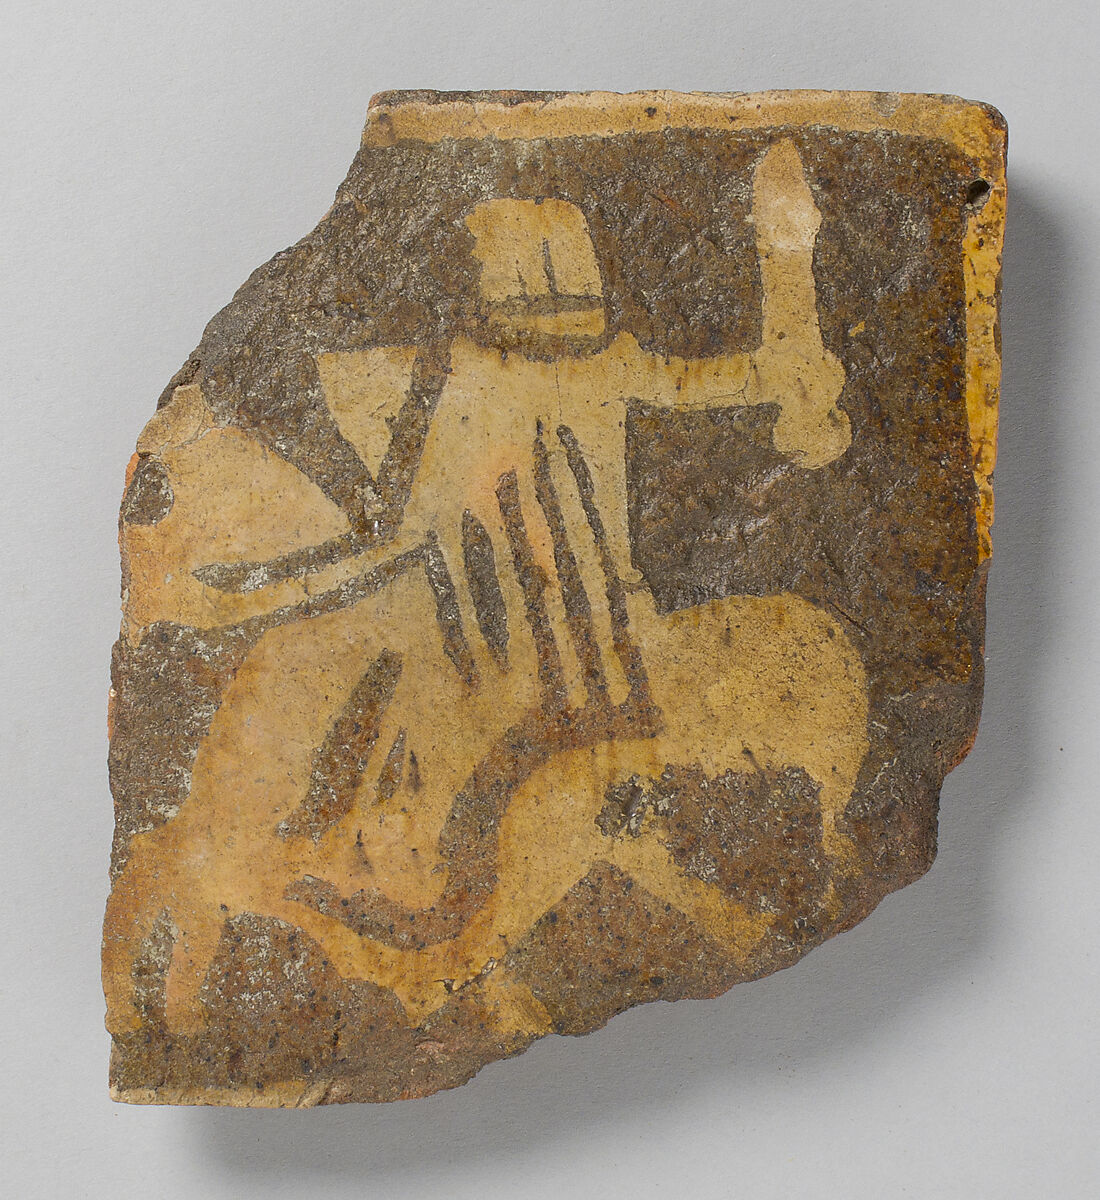 Tile, with helmeted knight on horseback, Fired earthenware, with slip decoration and lead glaze, British 